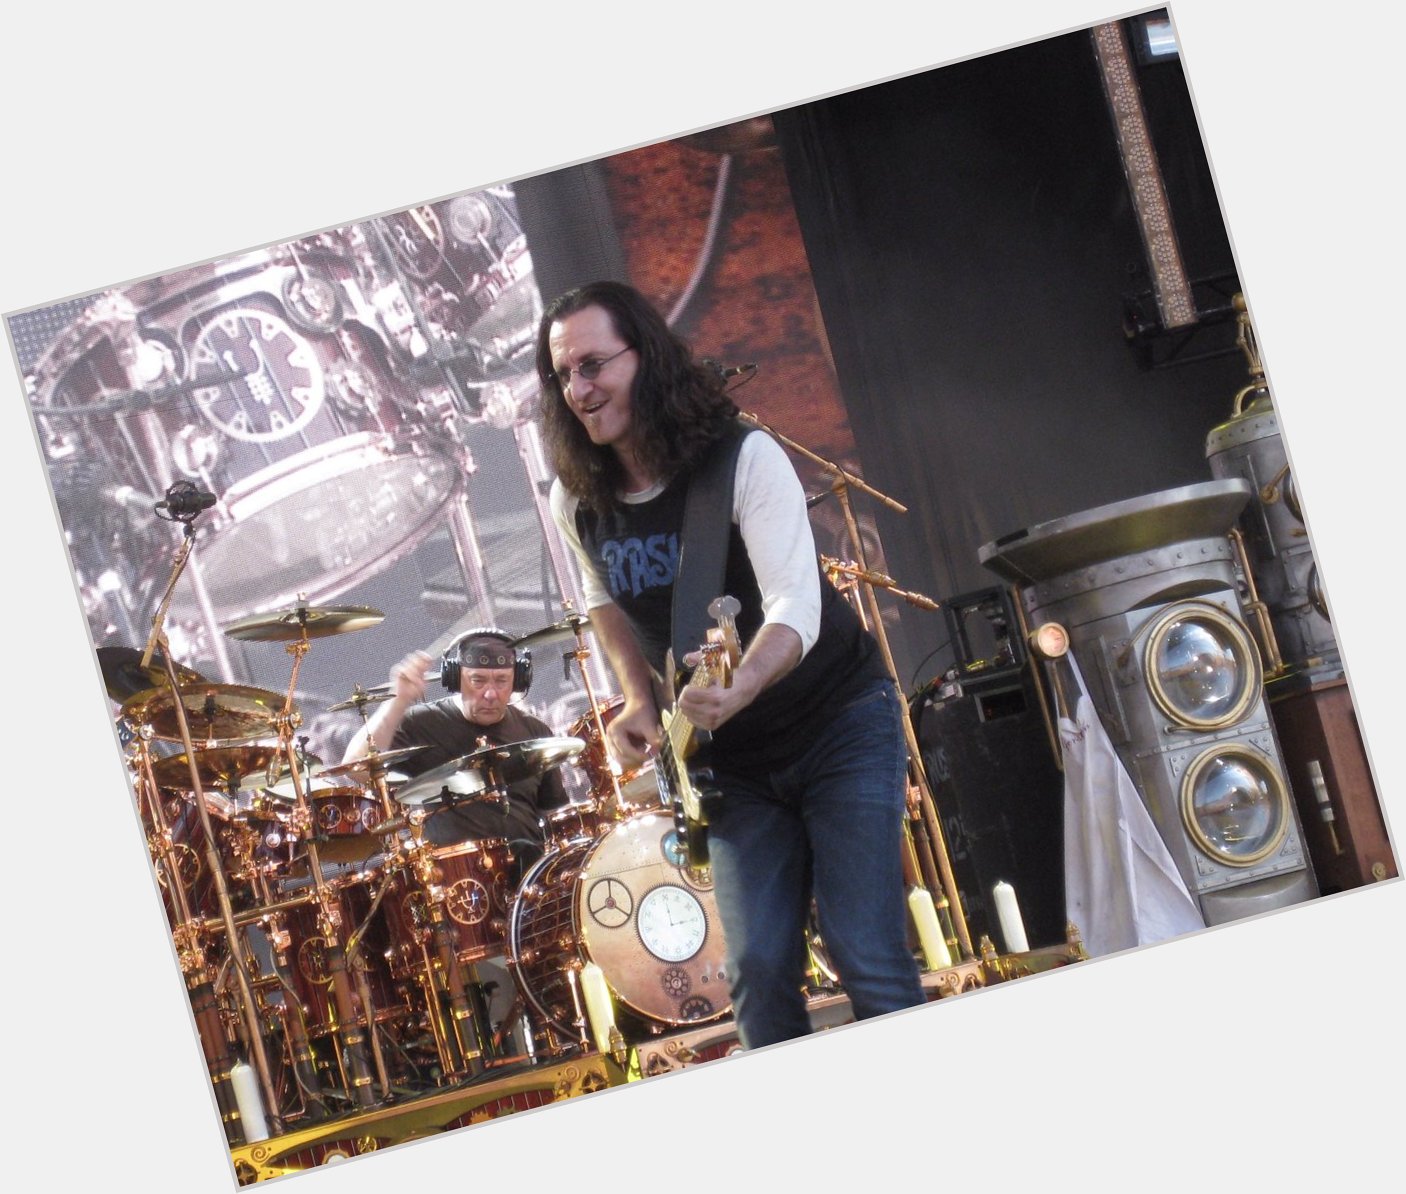 Happy Birthday Geddy Lee   by me, July 2, 2011, The Gorge Amphitheater, George, WA 